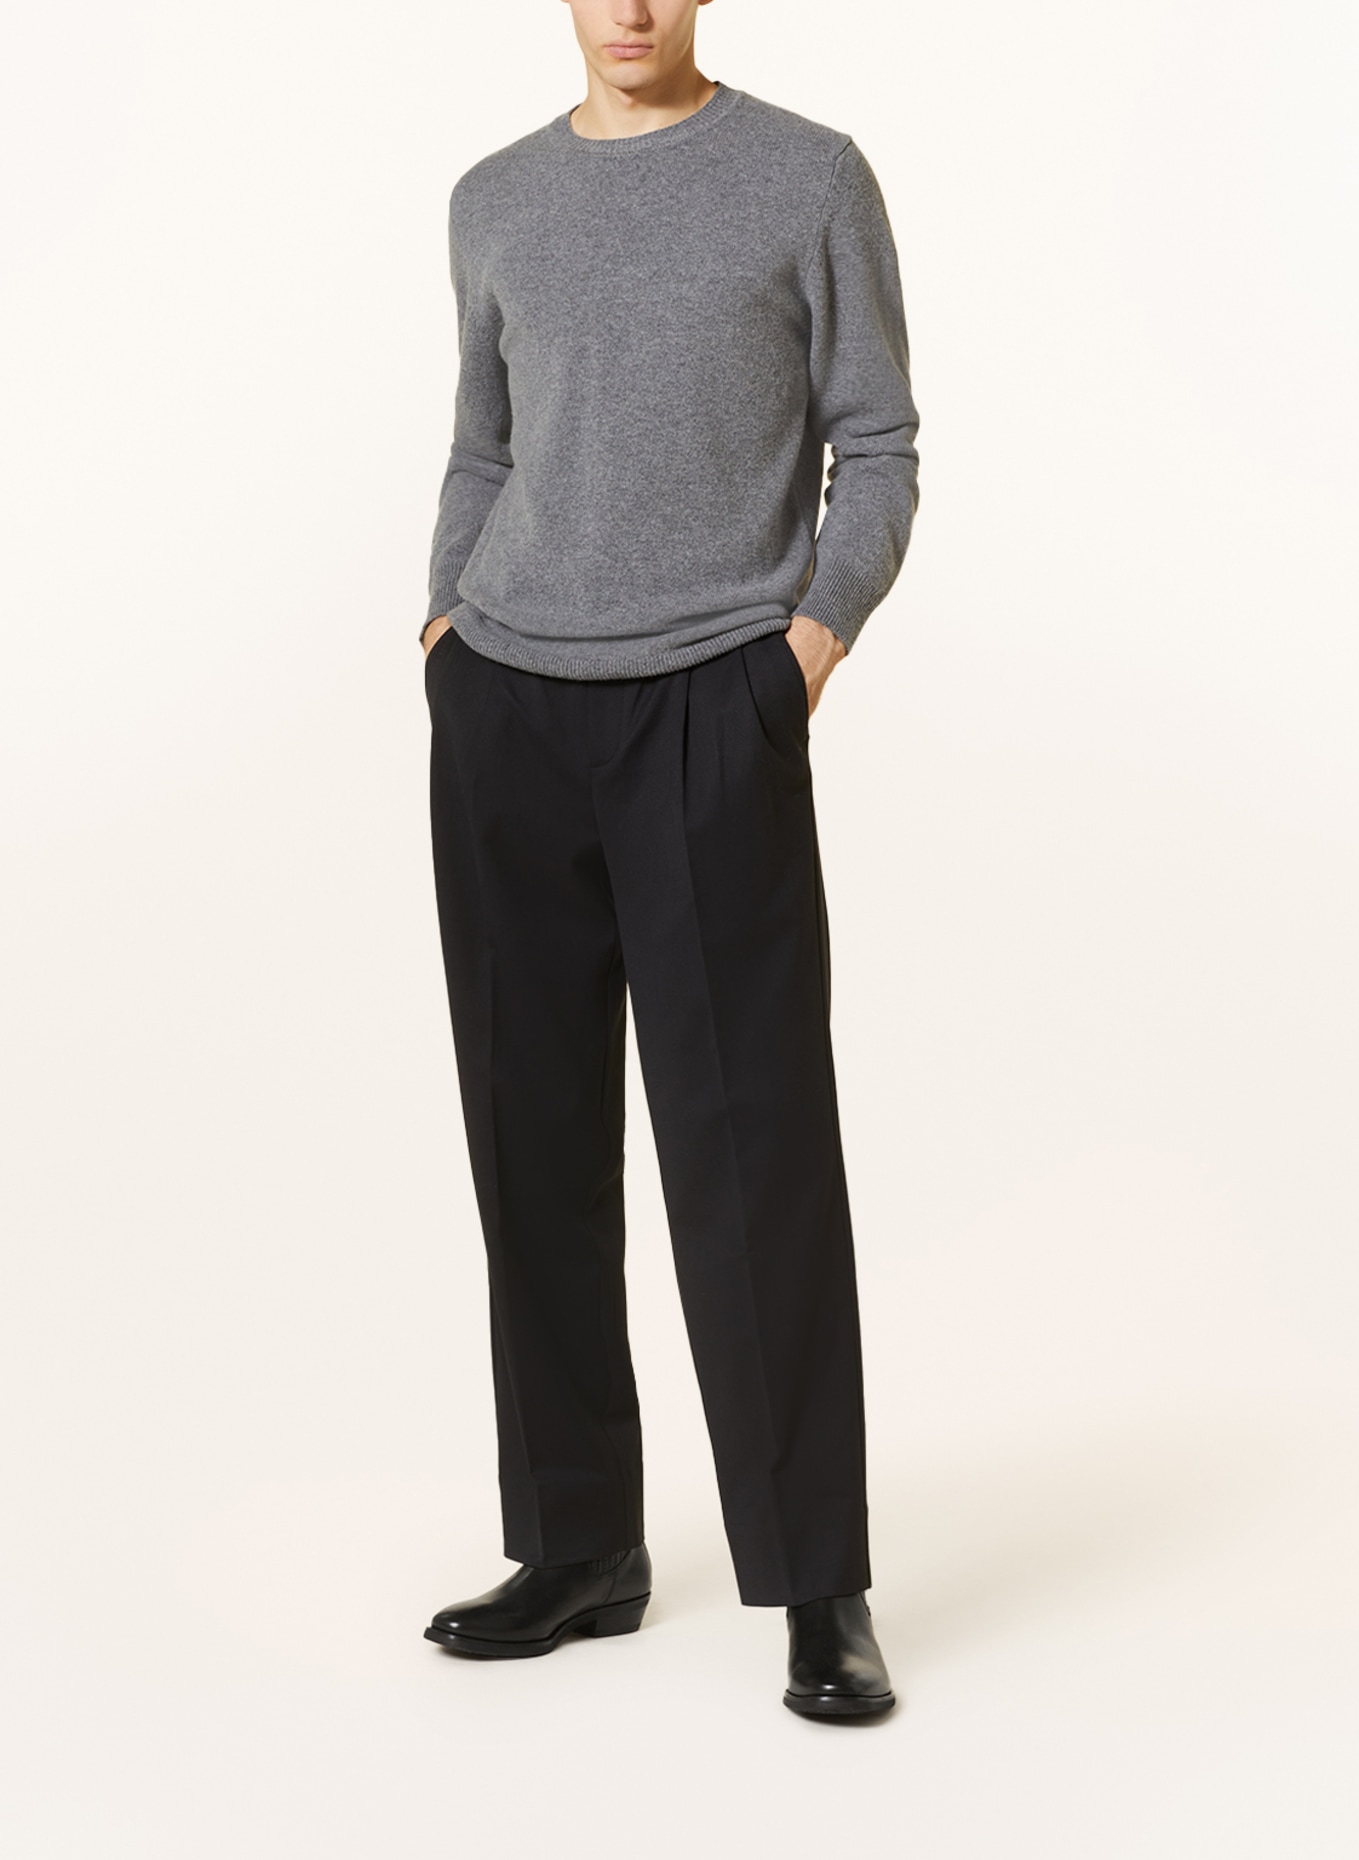 NORSE PROJECTS Sweater SIGFRIED made of merino wool, Color: GRAY (Image 2)